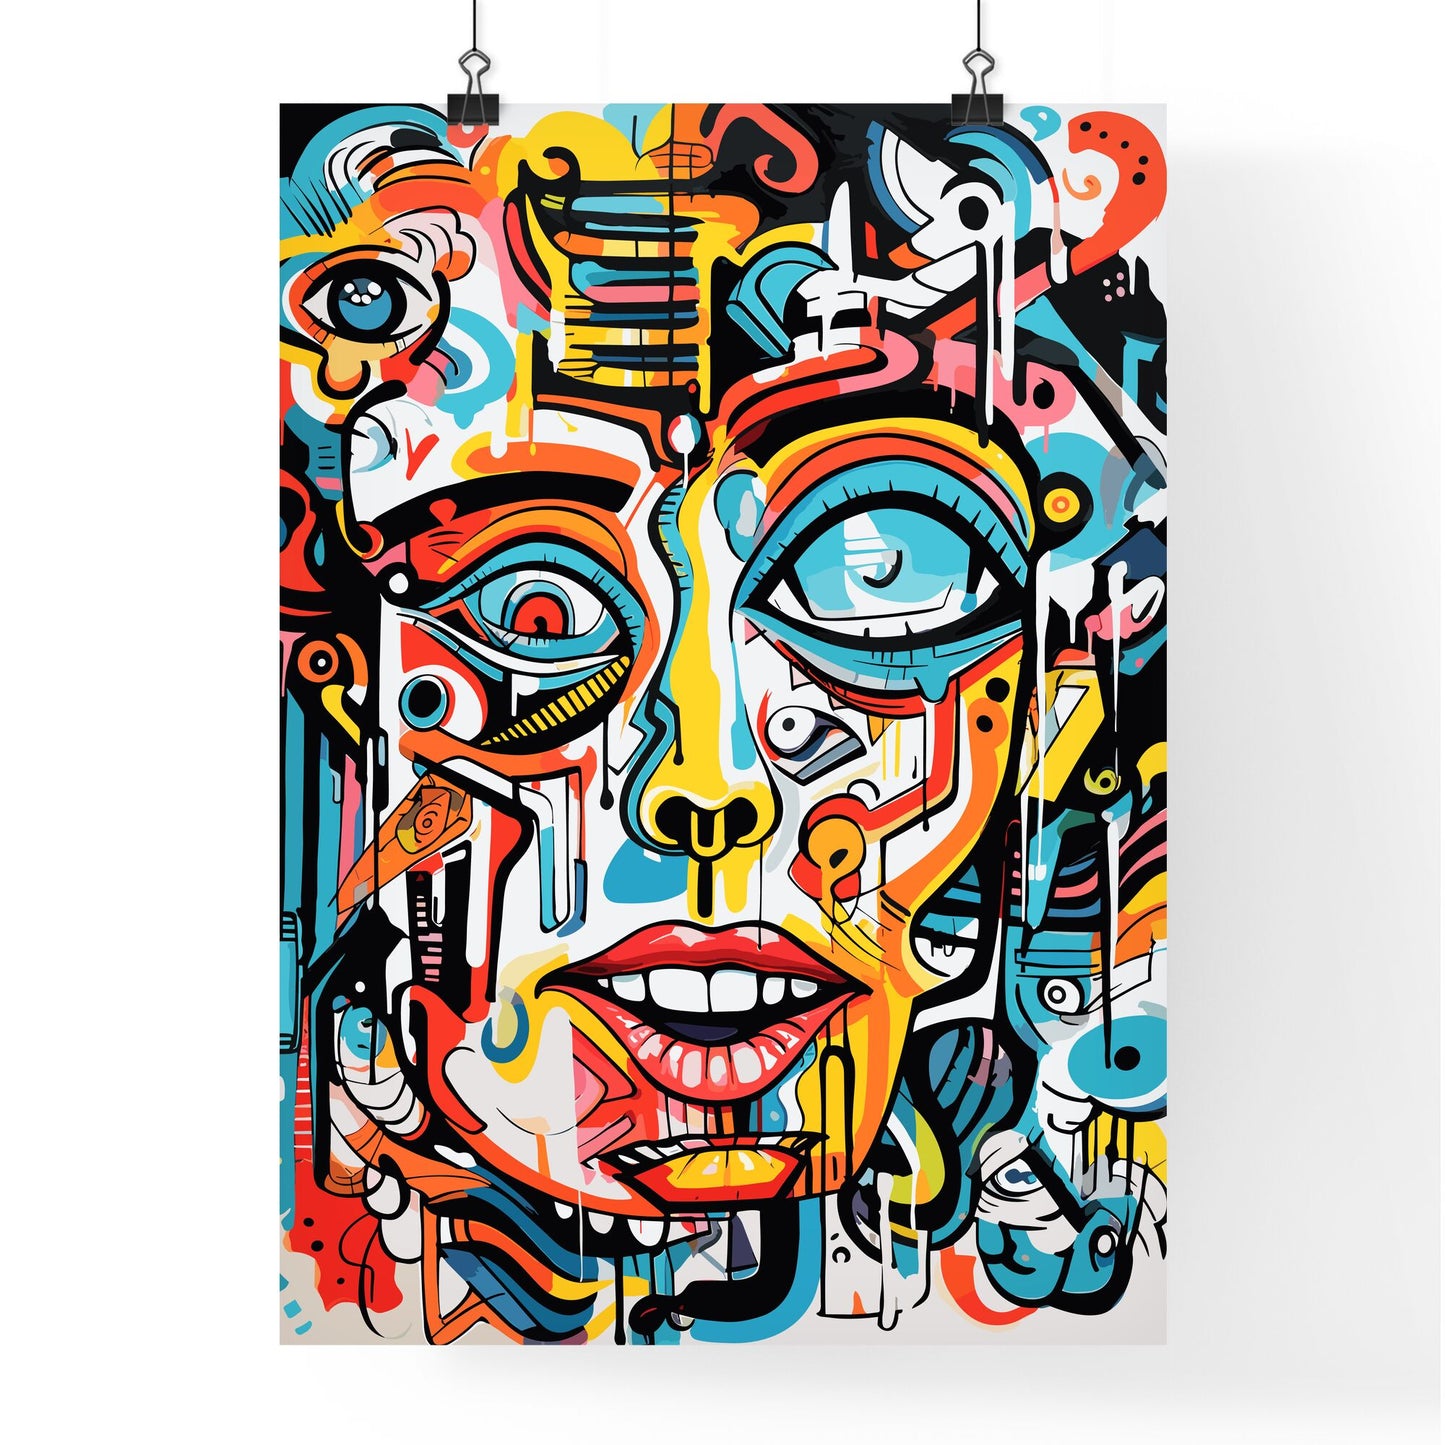 Boys Vs Girls - Impressive Scene - A Colorful Painting Of A Woman'S Face Default Title